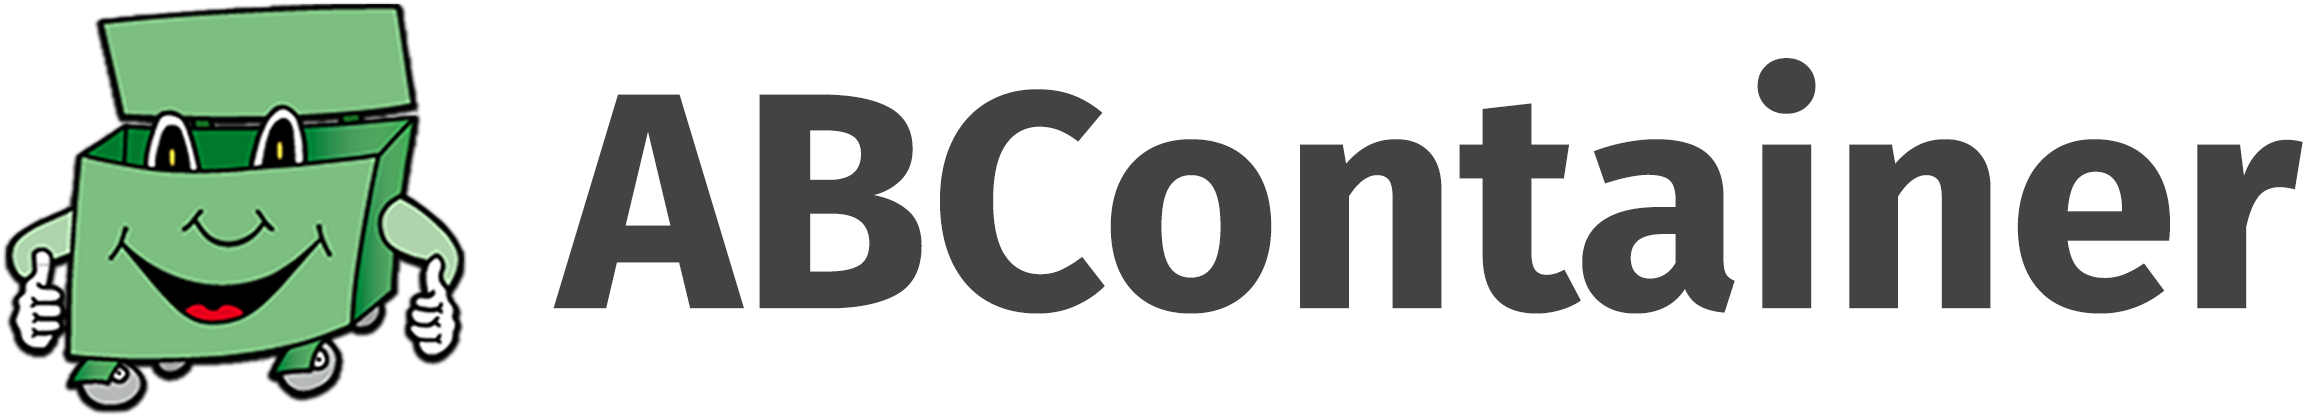 abcontainer logo